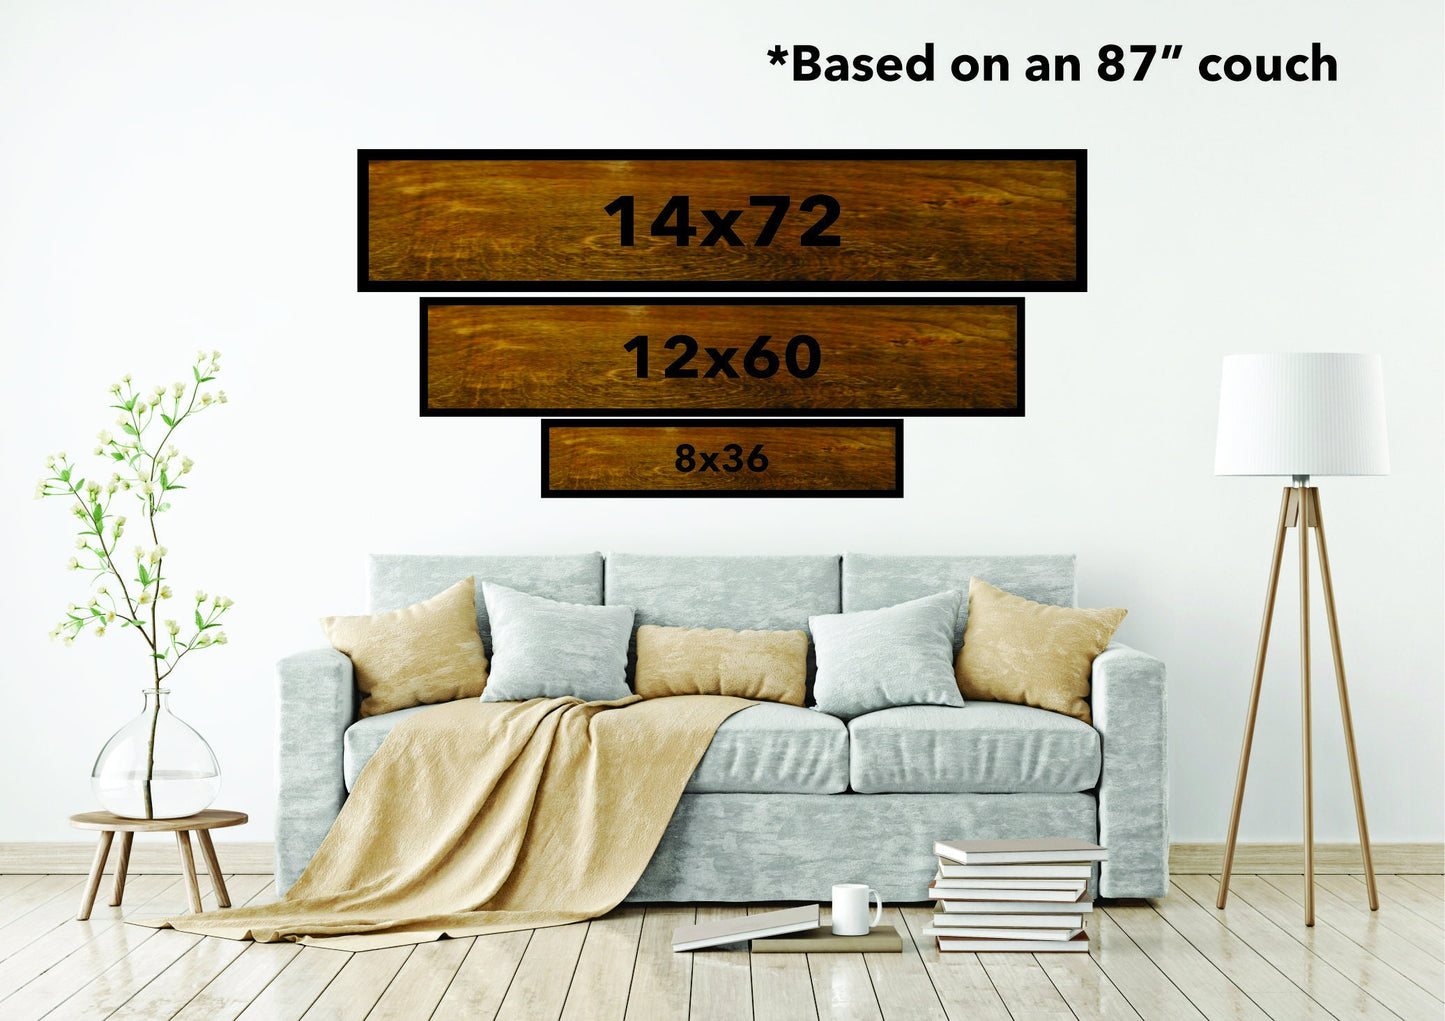 Inspirational Sign You Got This Raised Text Wood Sign Décor Office Conference Room Art Large Over Sized Rustic Primitive Shabby Chic 3D